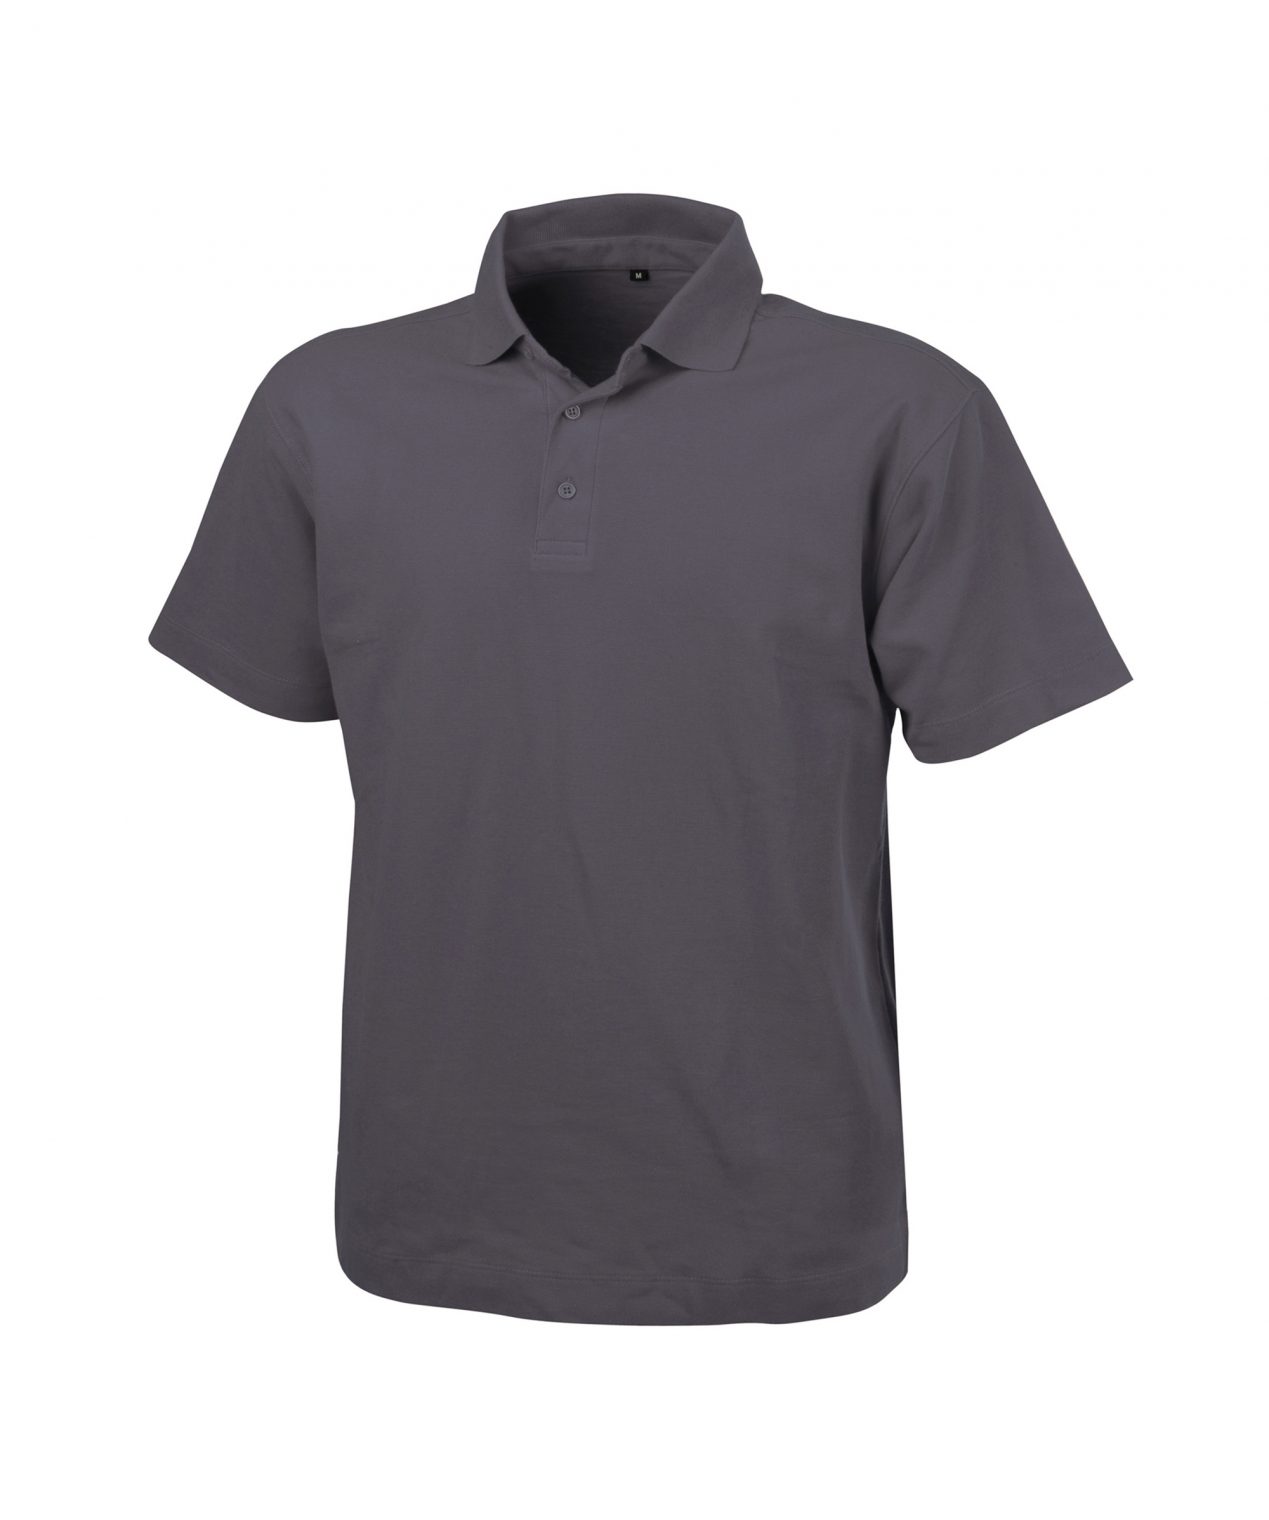 leon polo shirt cement grey front